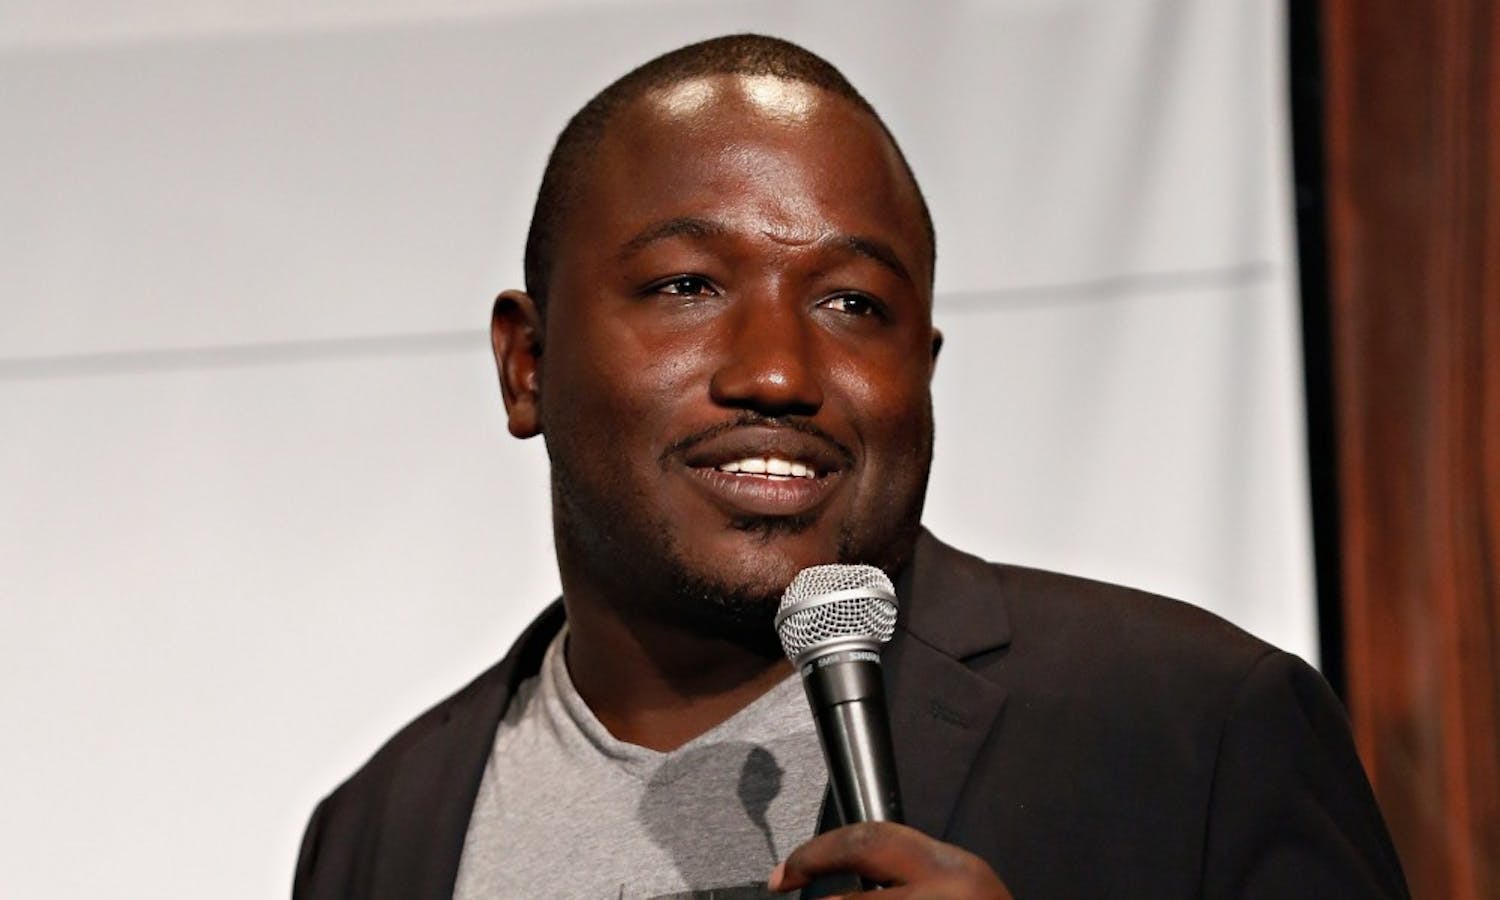 Buress' dry charisma&nbsp;and hilarious punchlines gave fans an hour and a half of great&nbsp;comedy.